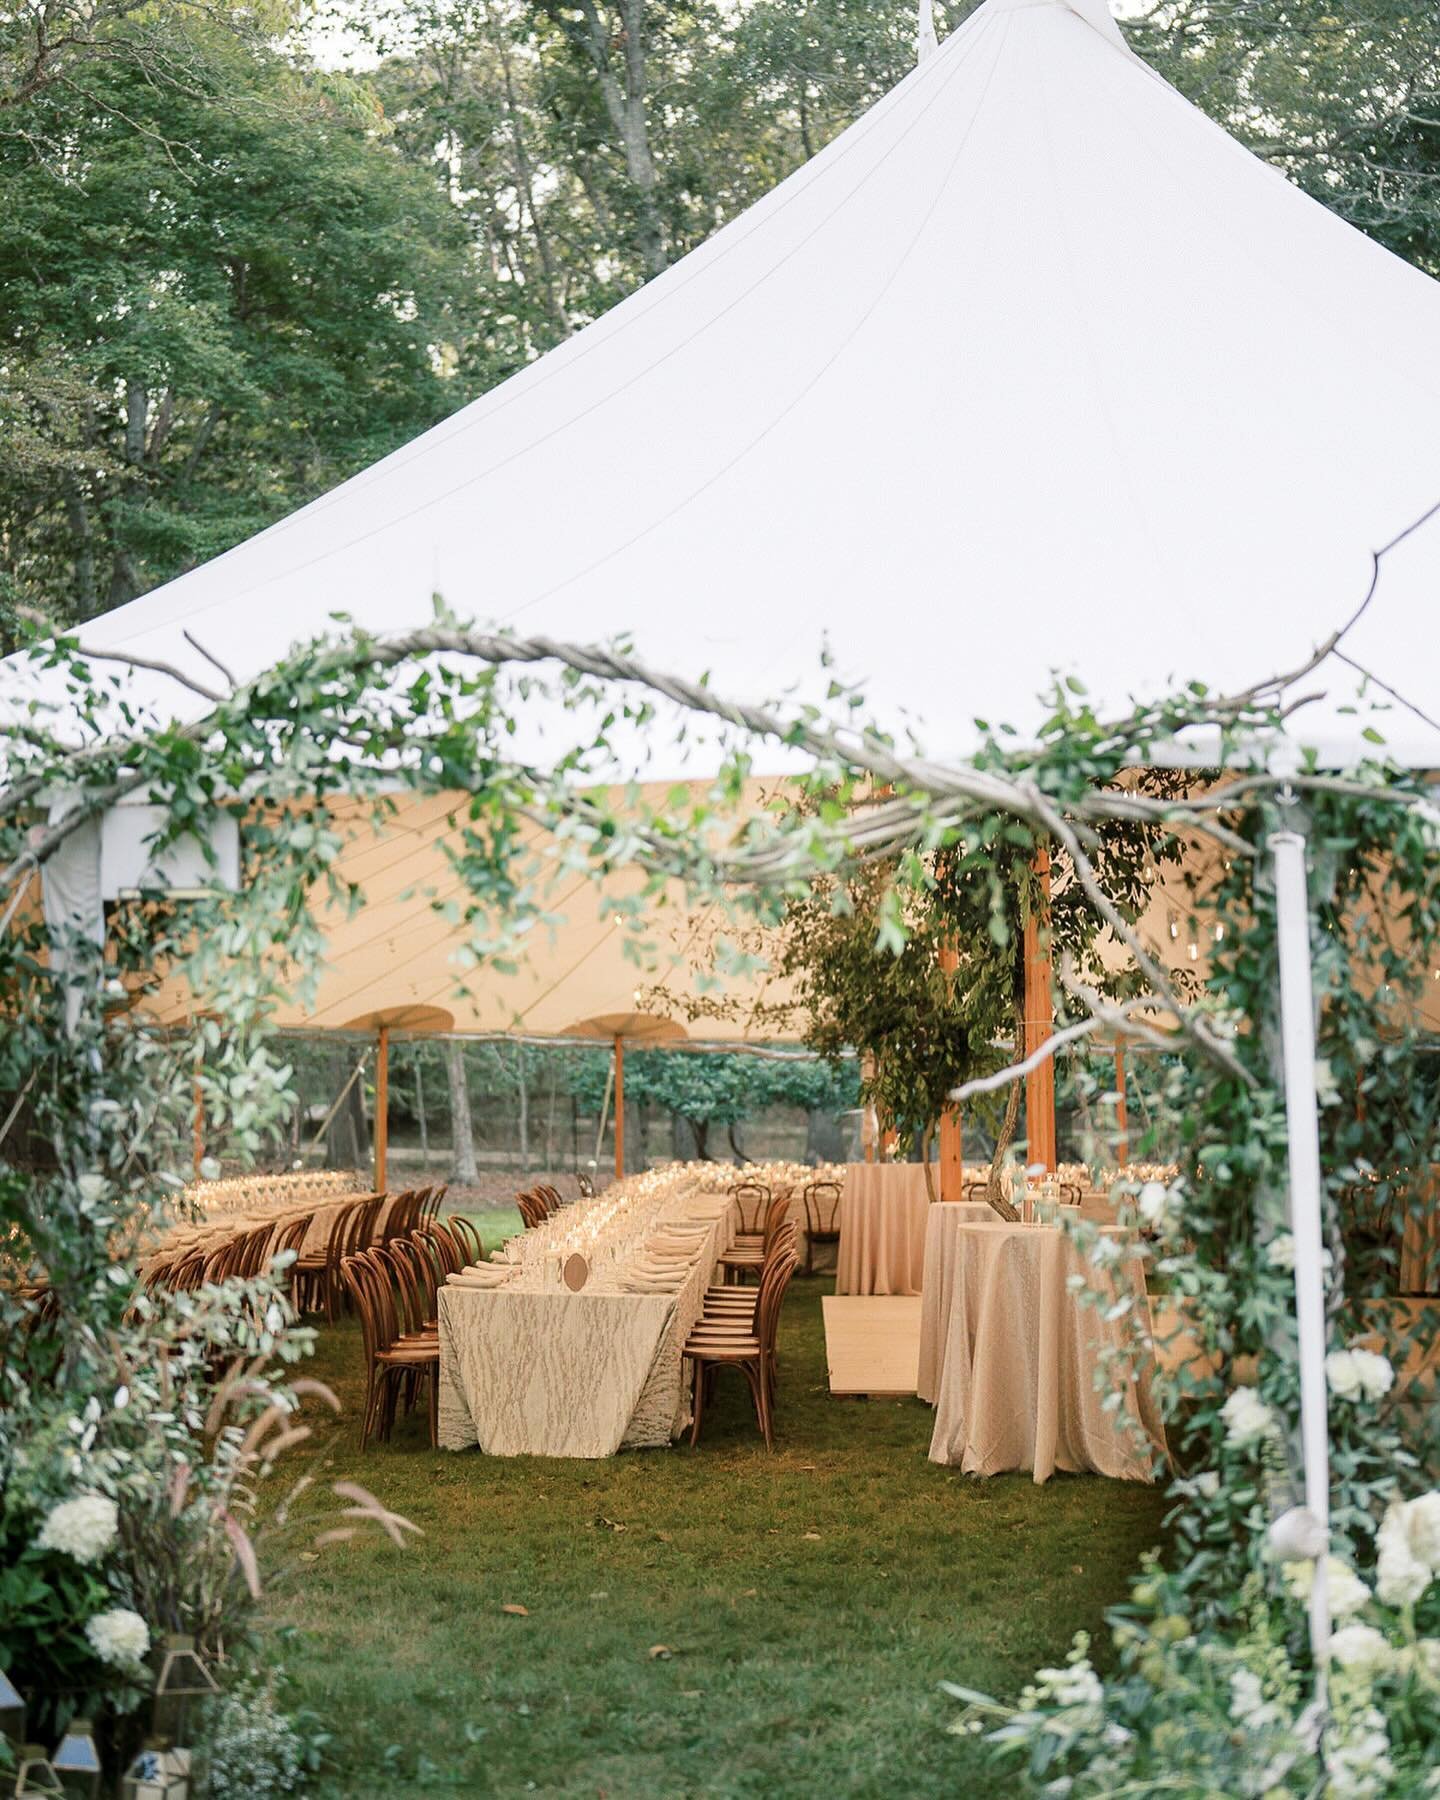 One of the most stunning tent reception setups I&rsquo;ve had the privilege to photograph. #goldenhourstudios